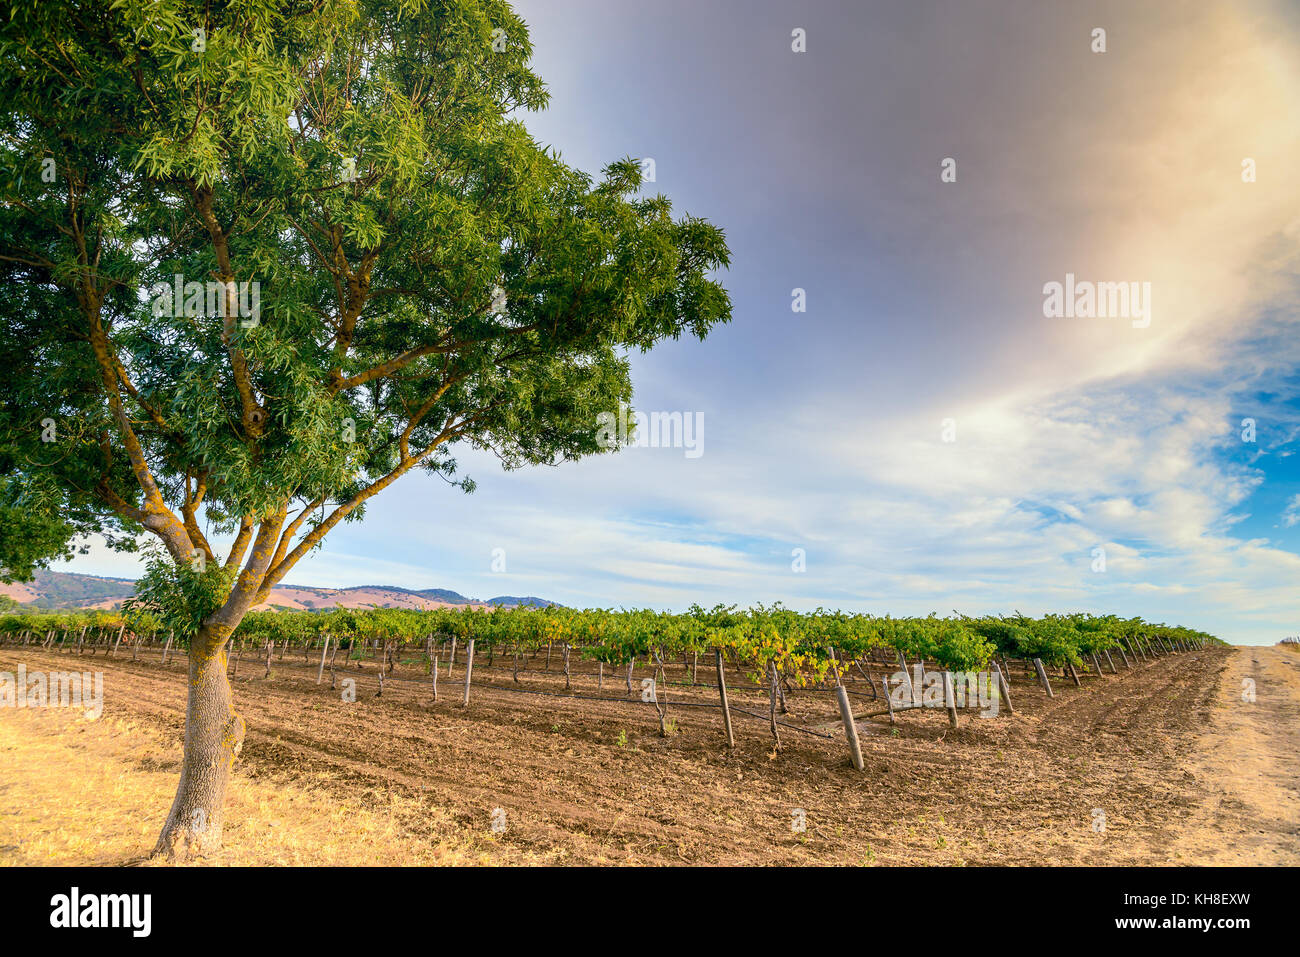 Grape vines with tree  in Barossa valley at sunset, South Australia Stock Photo